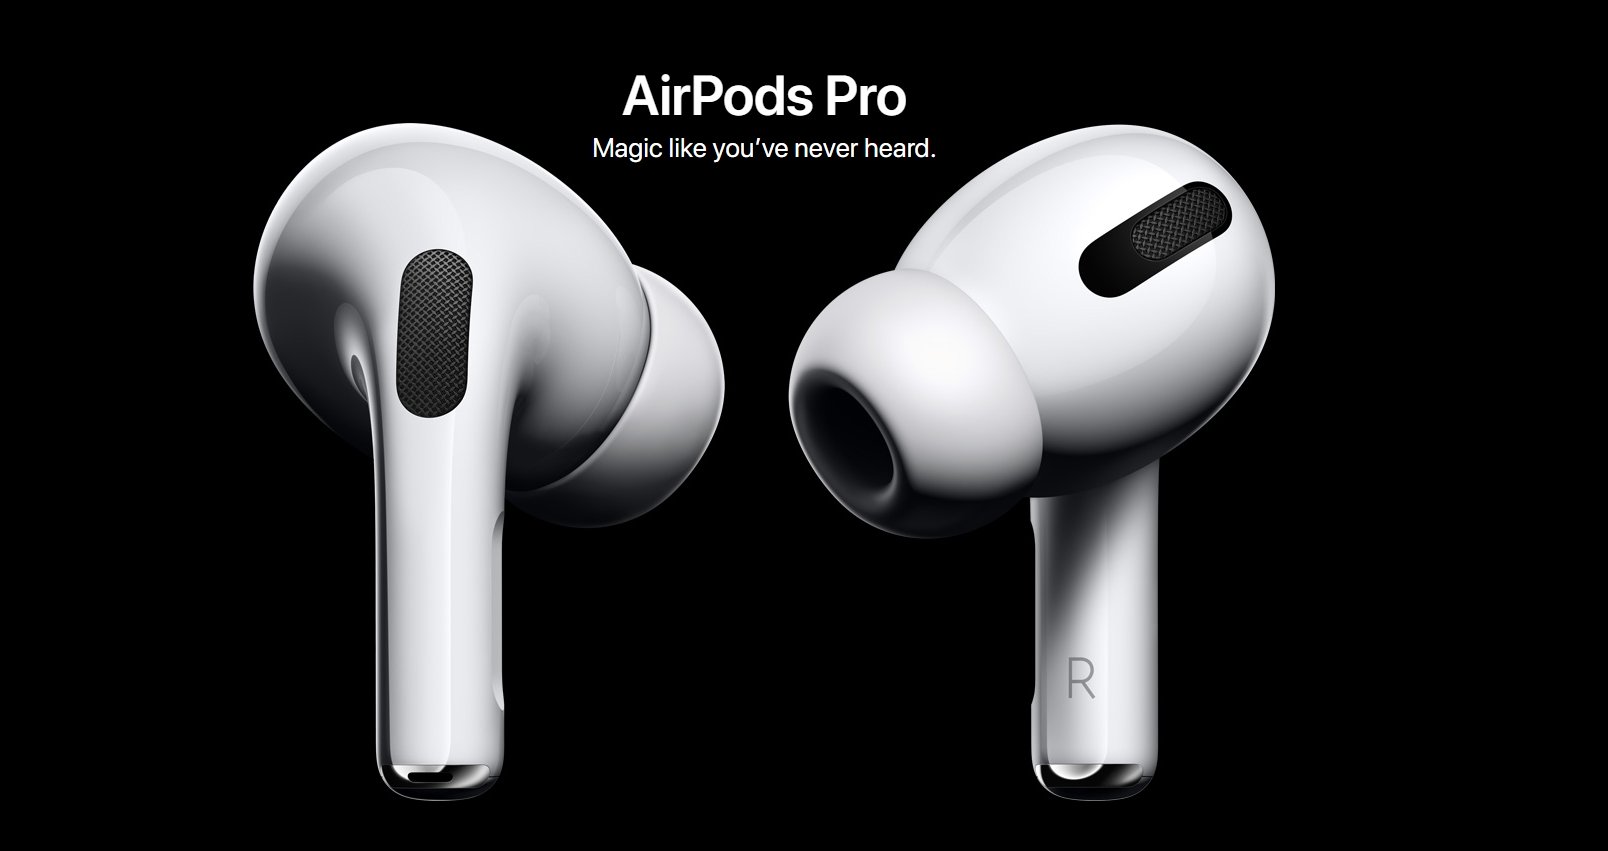 Apple will launch AirPods 3 in the first half of 2021, design similar to AirPods Pro: Ming-Chi Kuo